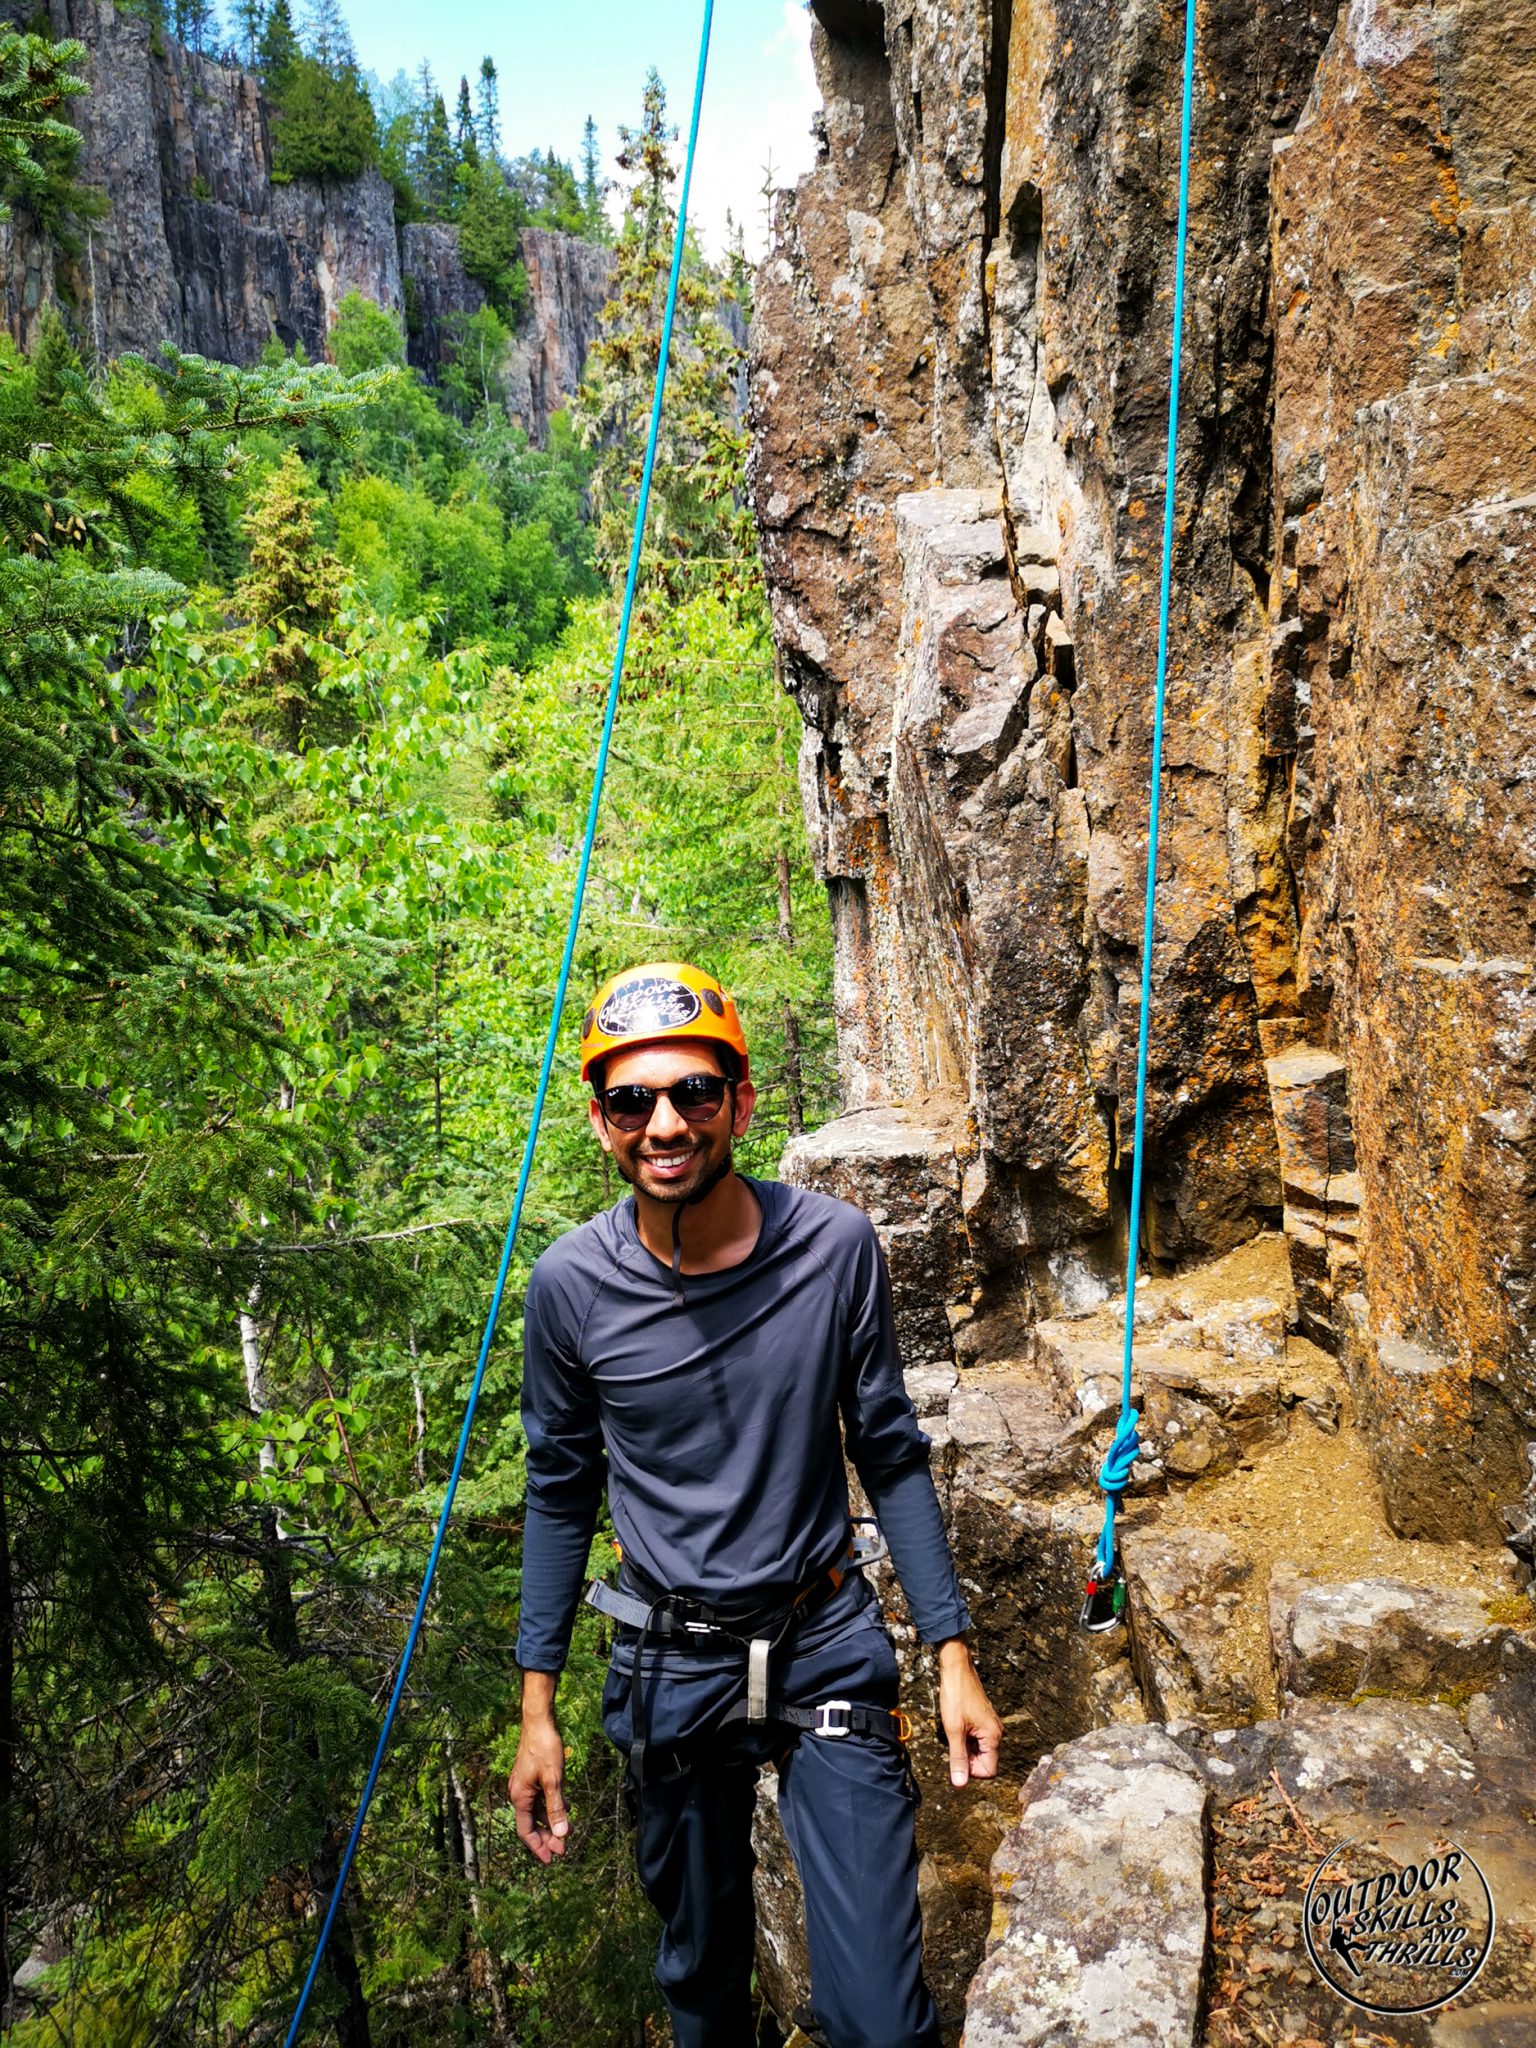 Privategroup Rock Climbing Adventure Outdoor Skills And Thrills